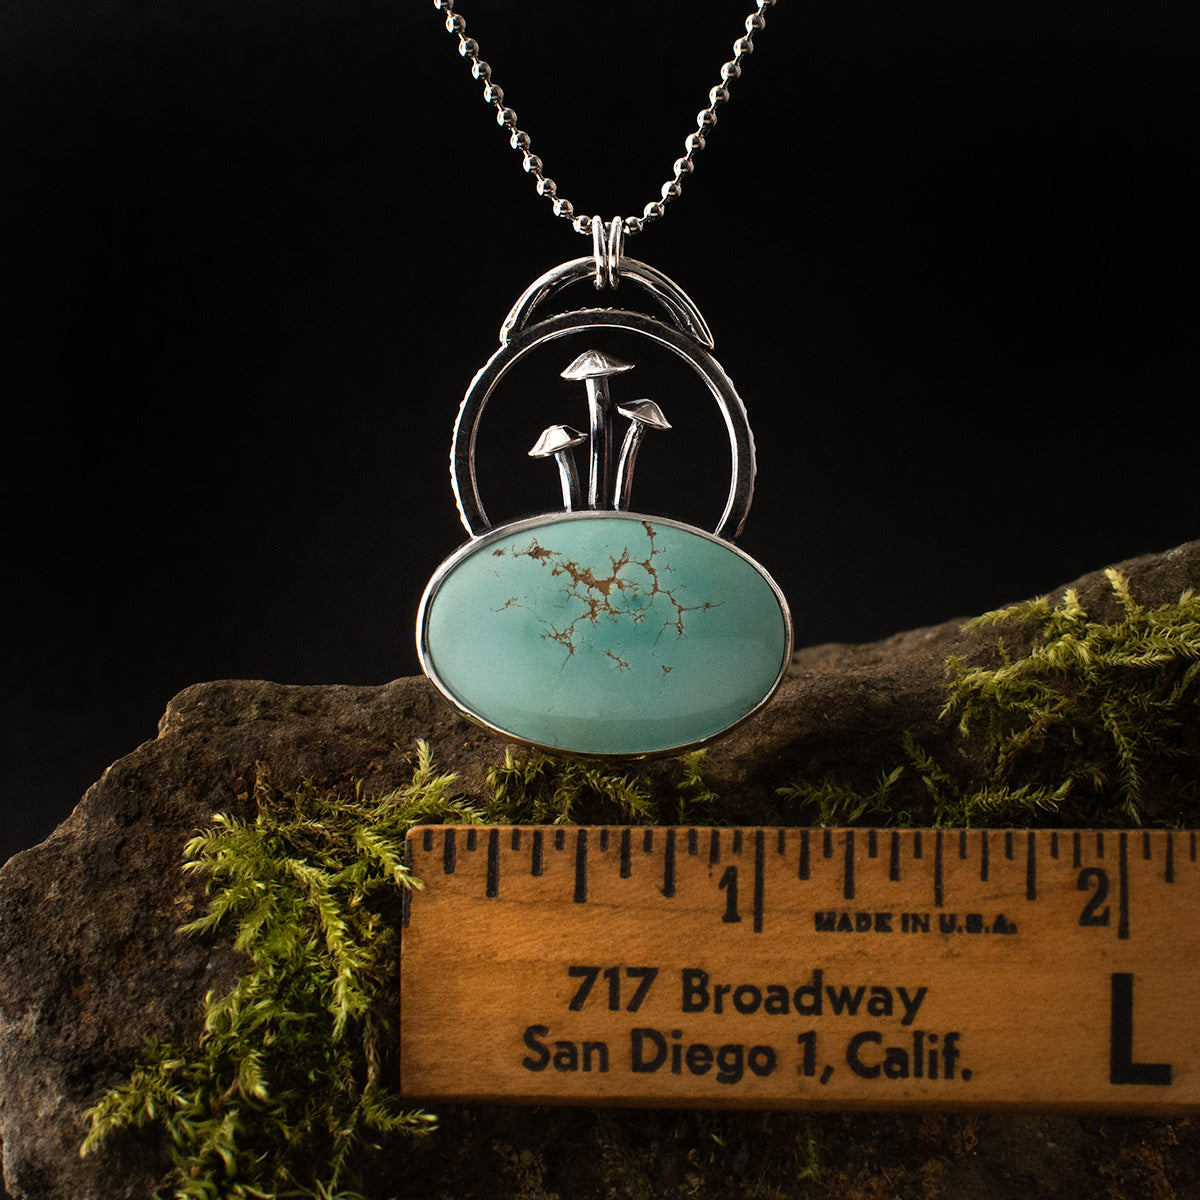 The Turquoise Fungal Loop Pendant with a ruler for scale, measuring around 1 and 1/4 inches wide from one end of the oval-shaped stone setting to the other.